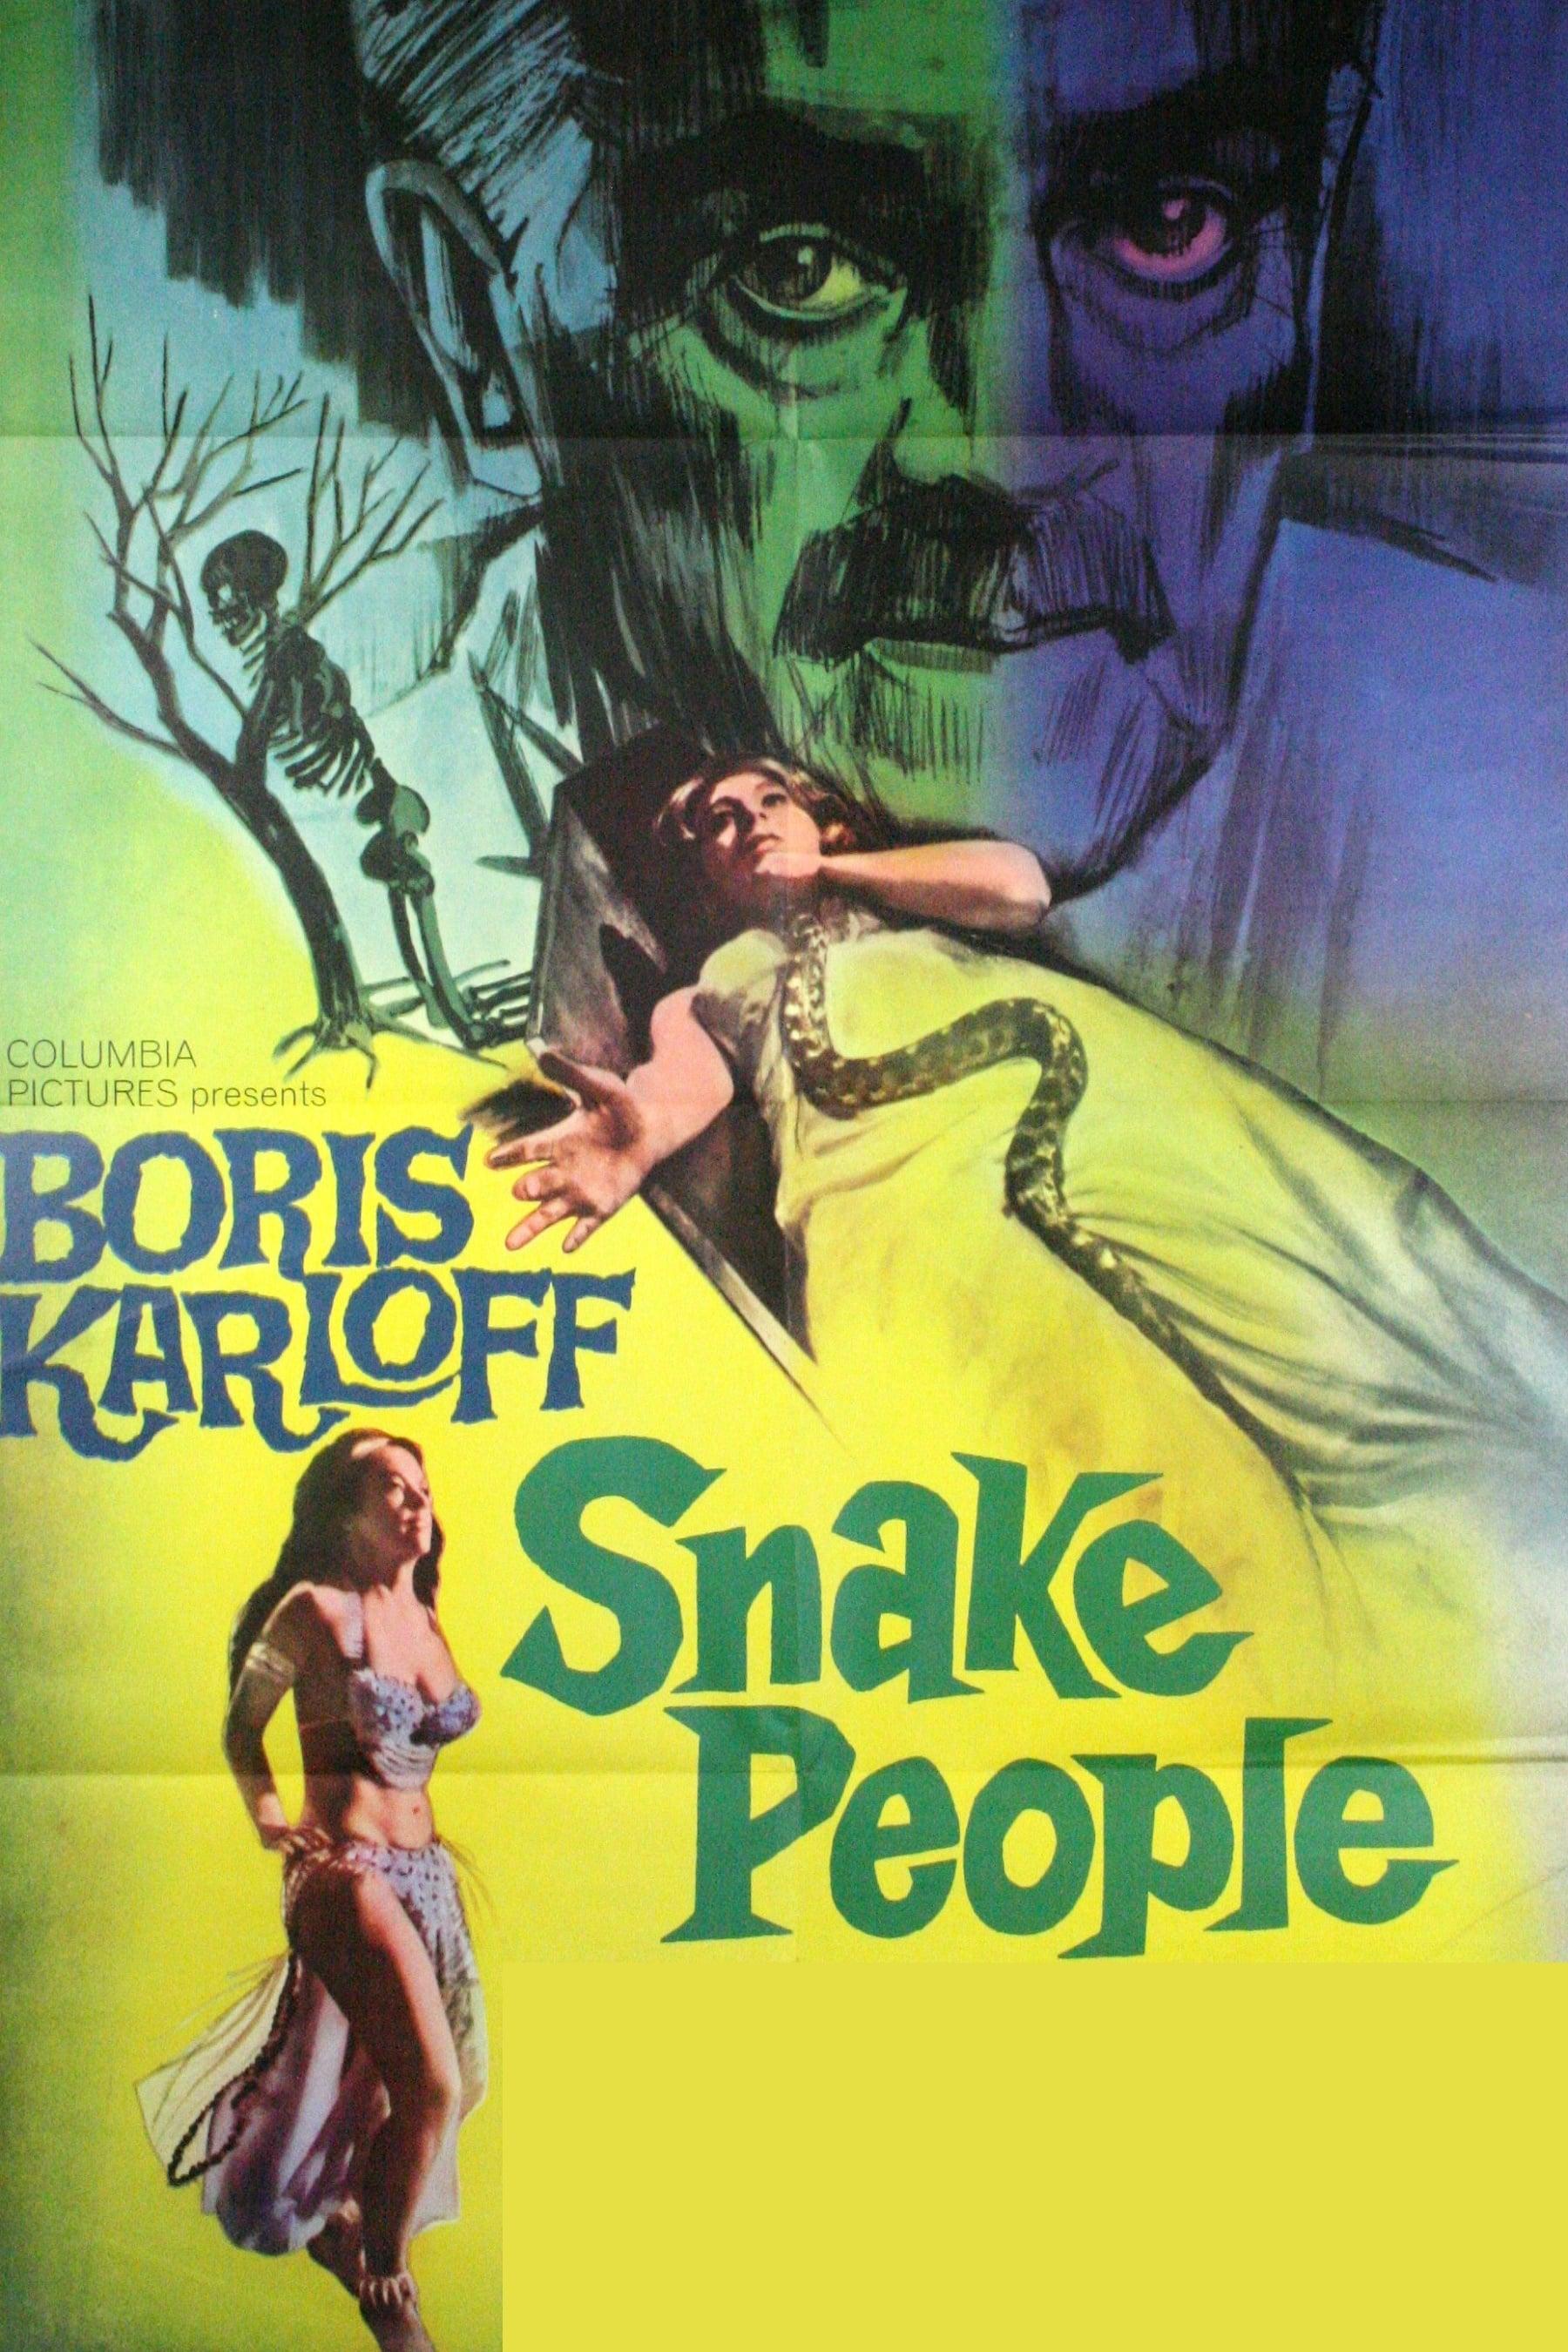 Isle of the Snake People poster